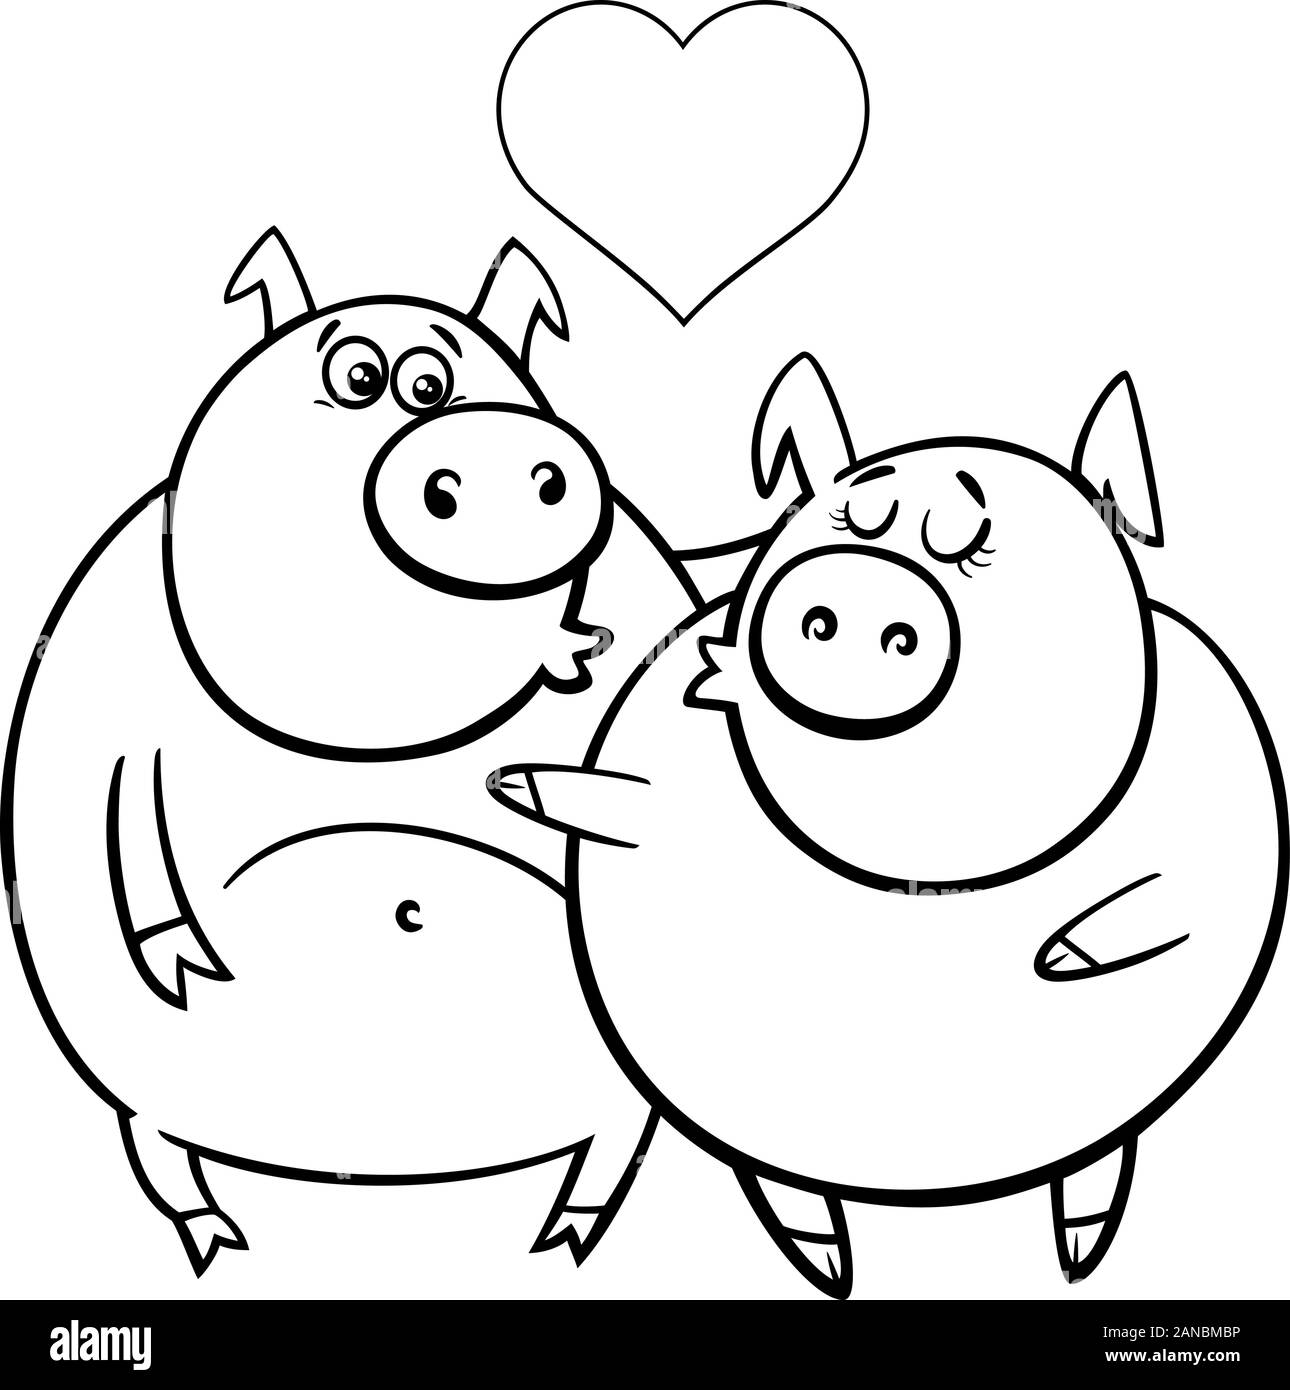 Black and White Valentines Day Greeting Card Cartoon Illustration with Pig Characters in Love Coloring Book Page Stock Vector